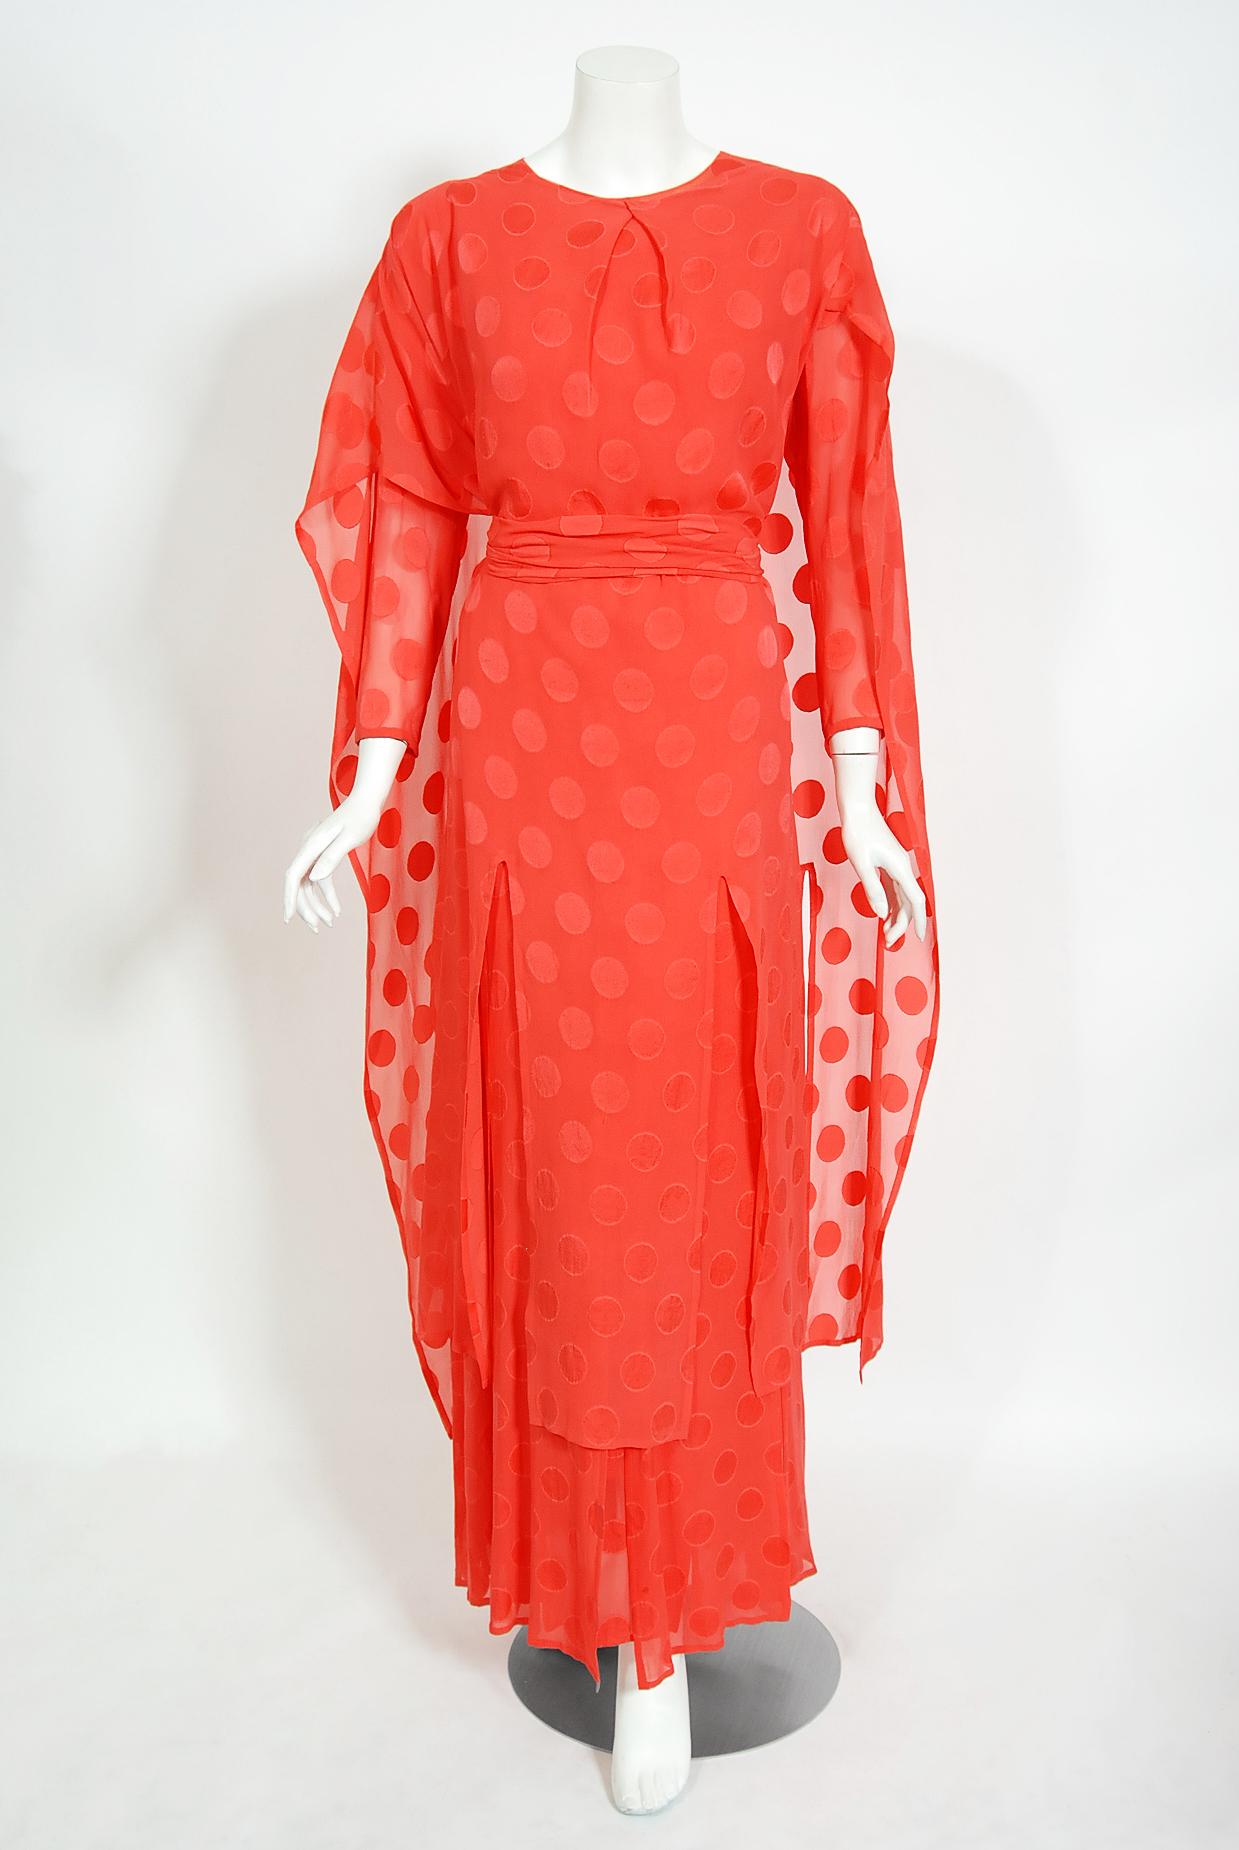 Vintage 1973 Givenchy Haute Couture Orange Dotted Silk Carwash-Hem Caftan Gown For Sale 5